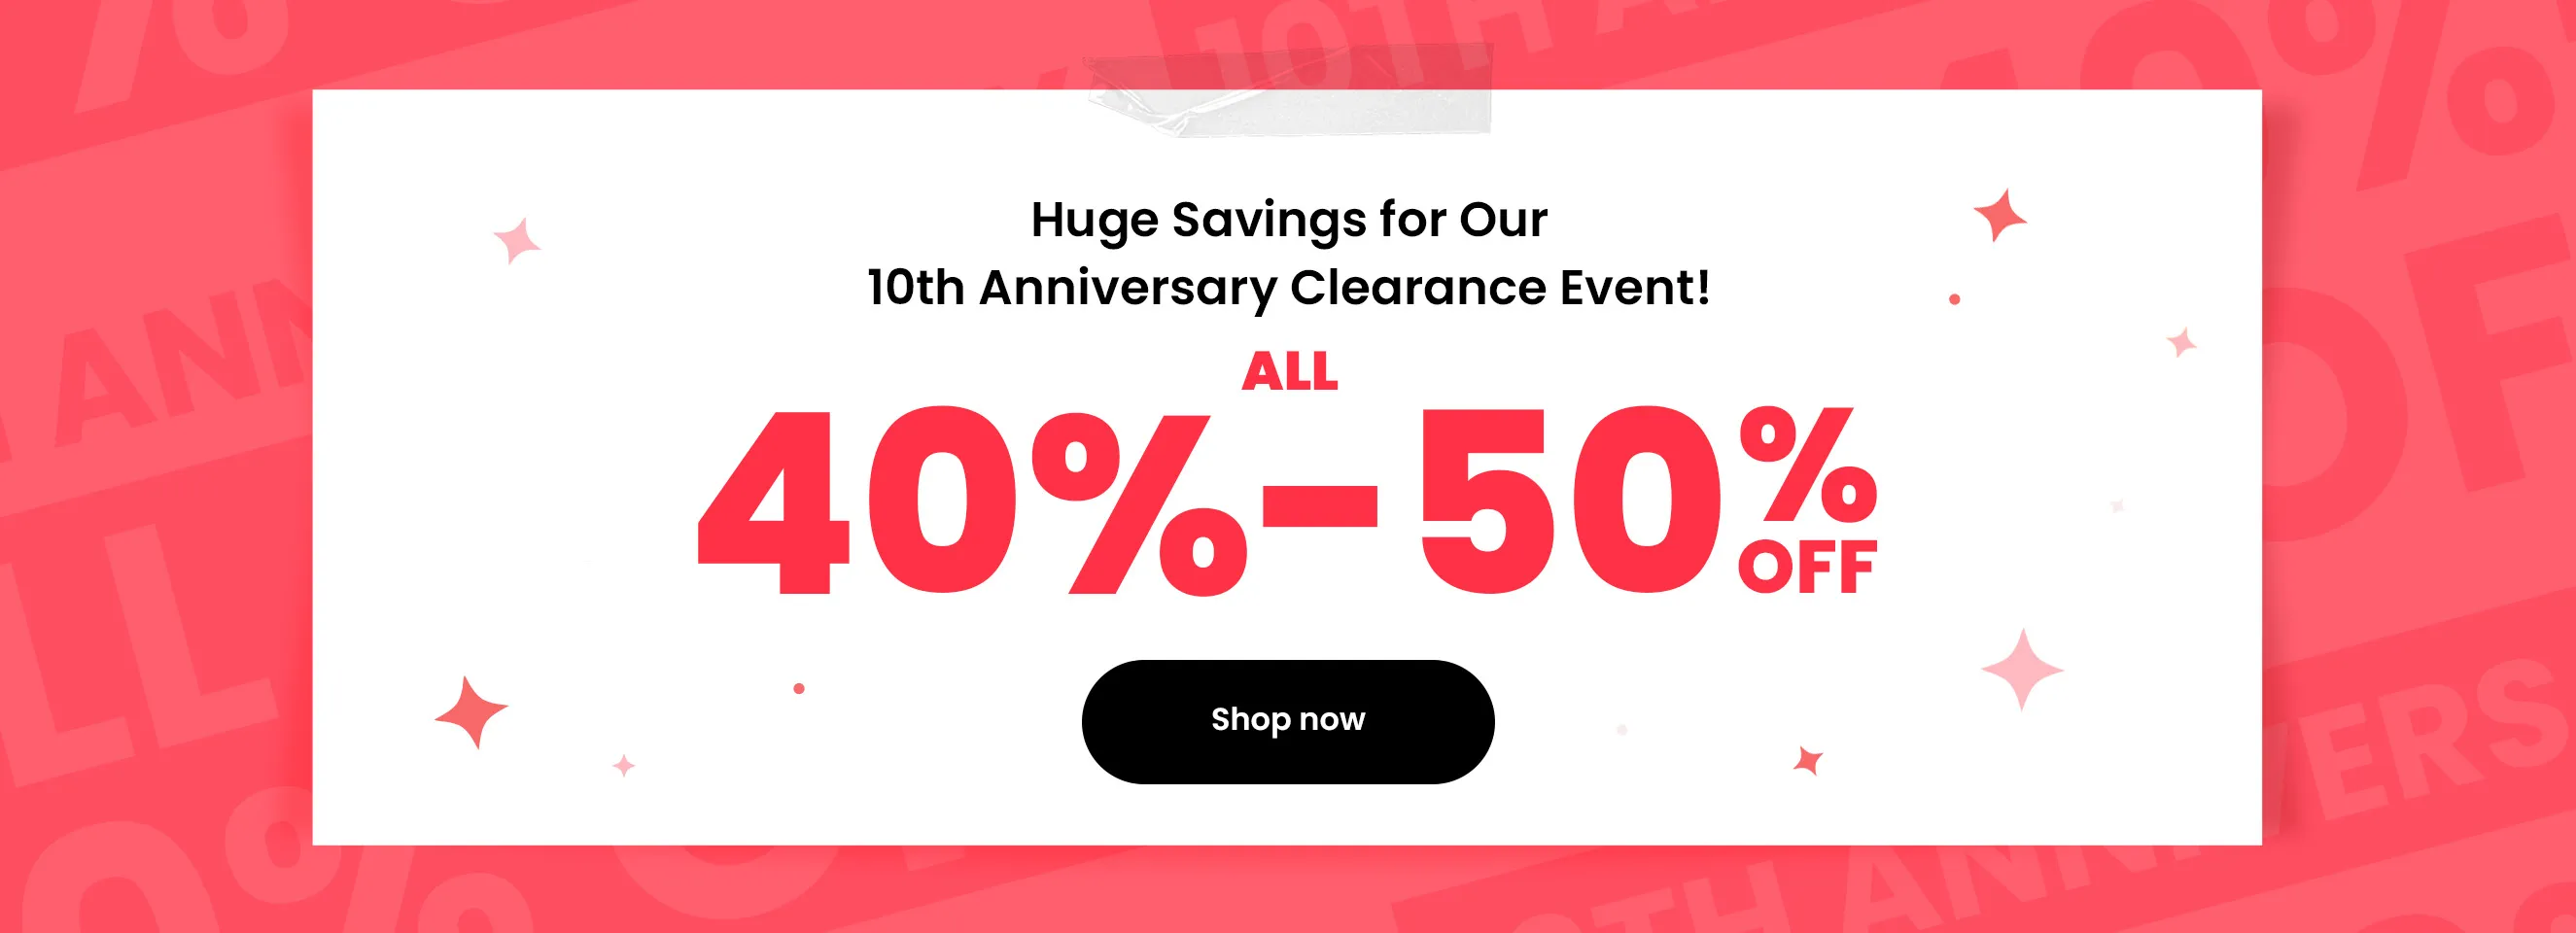 Click it to join Seasonal Clearance activity